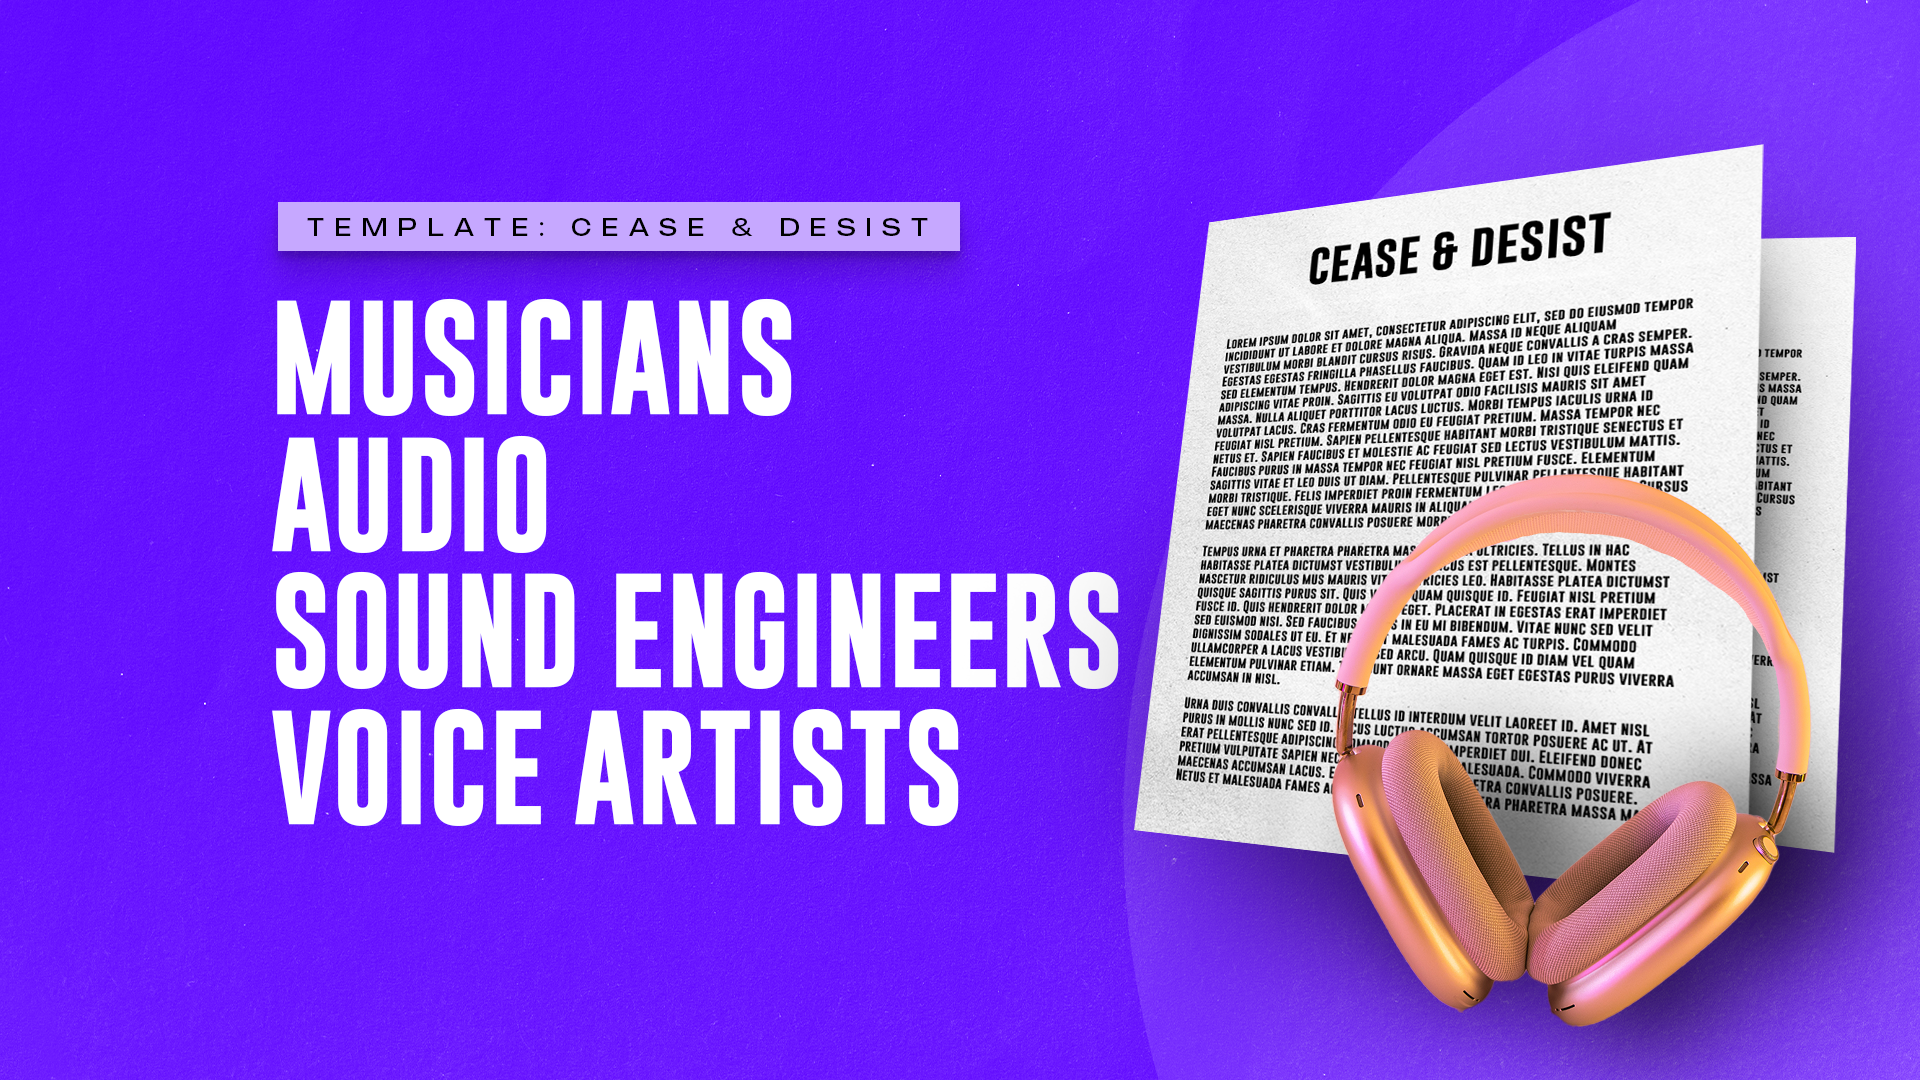 MUSICIANS AND AUDIO AND SOUND ENGINEERS AND VOICE ARTISTS REQUIRING A CEASE AND DESIST